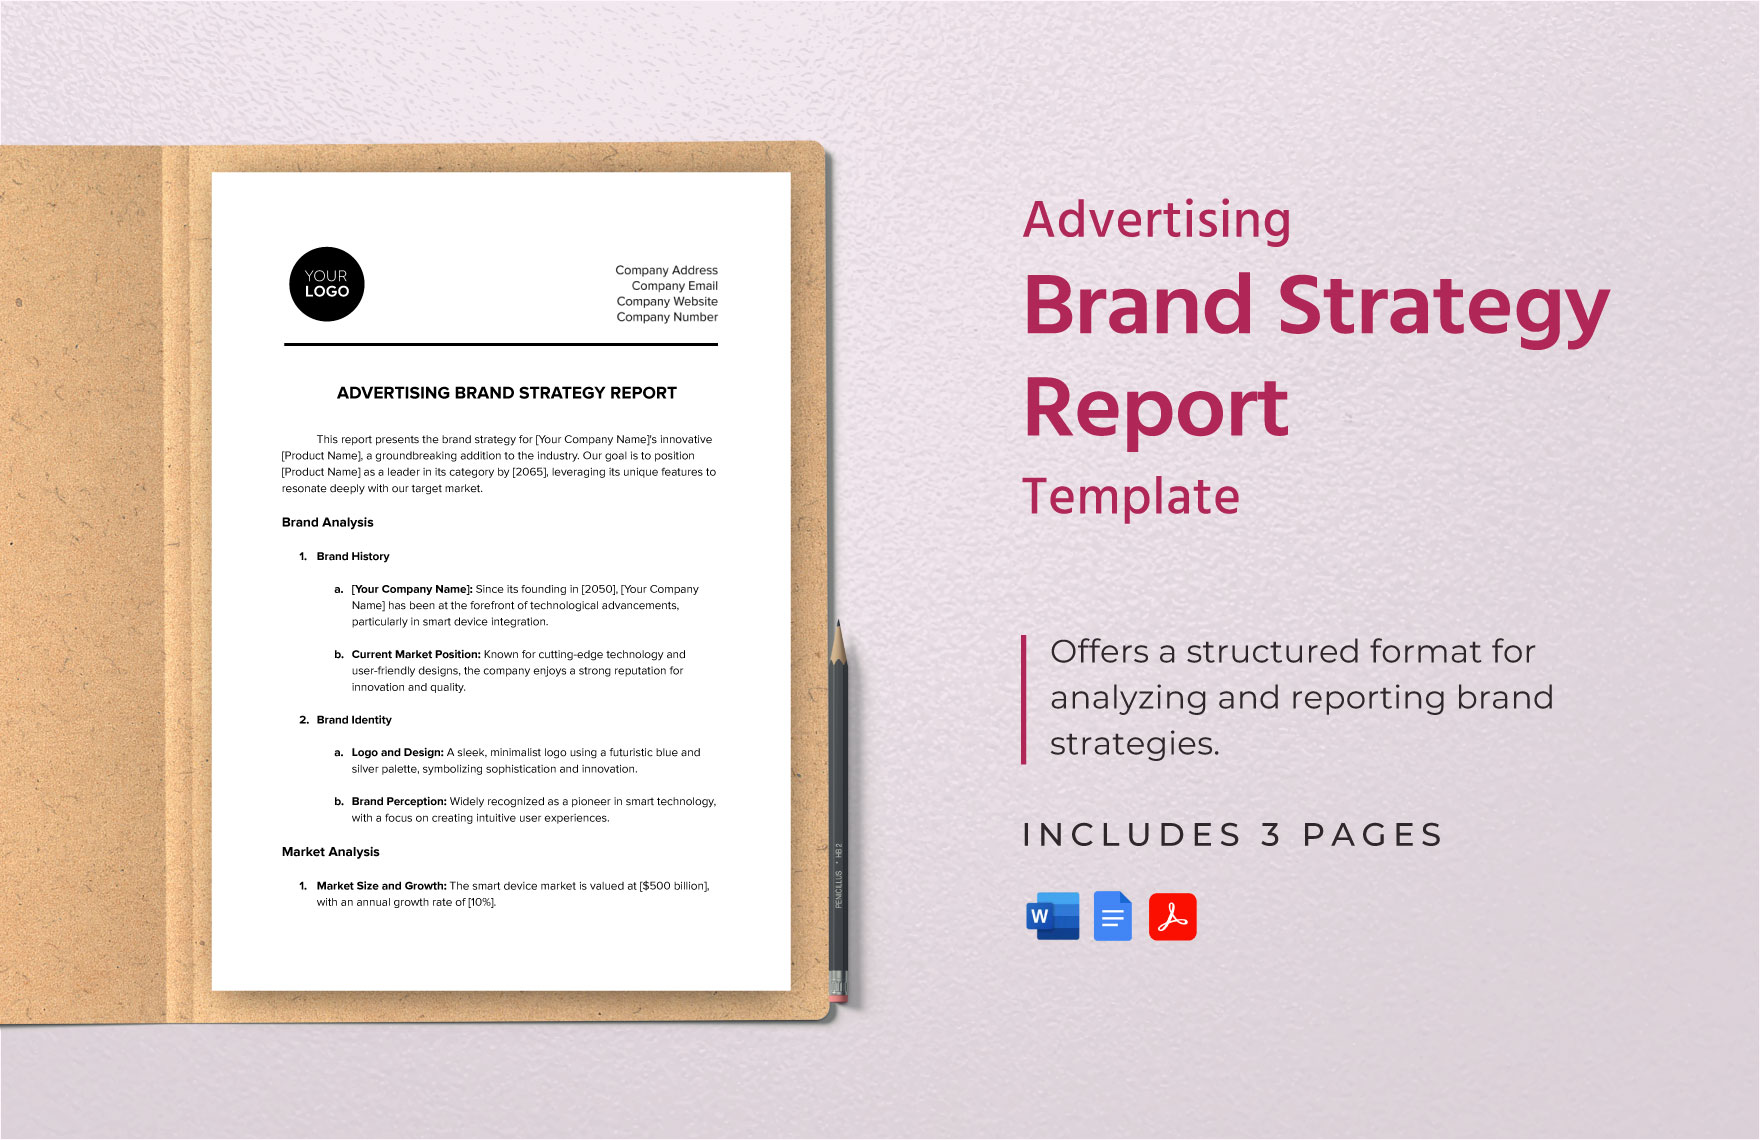 Advertising Brand Strategy Report Template in Word, Google Docs, PDF